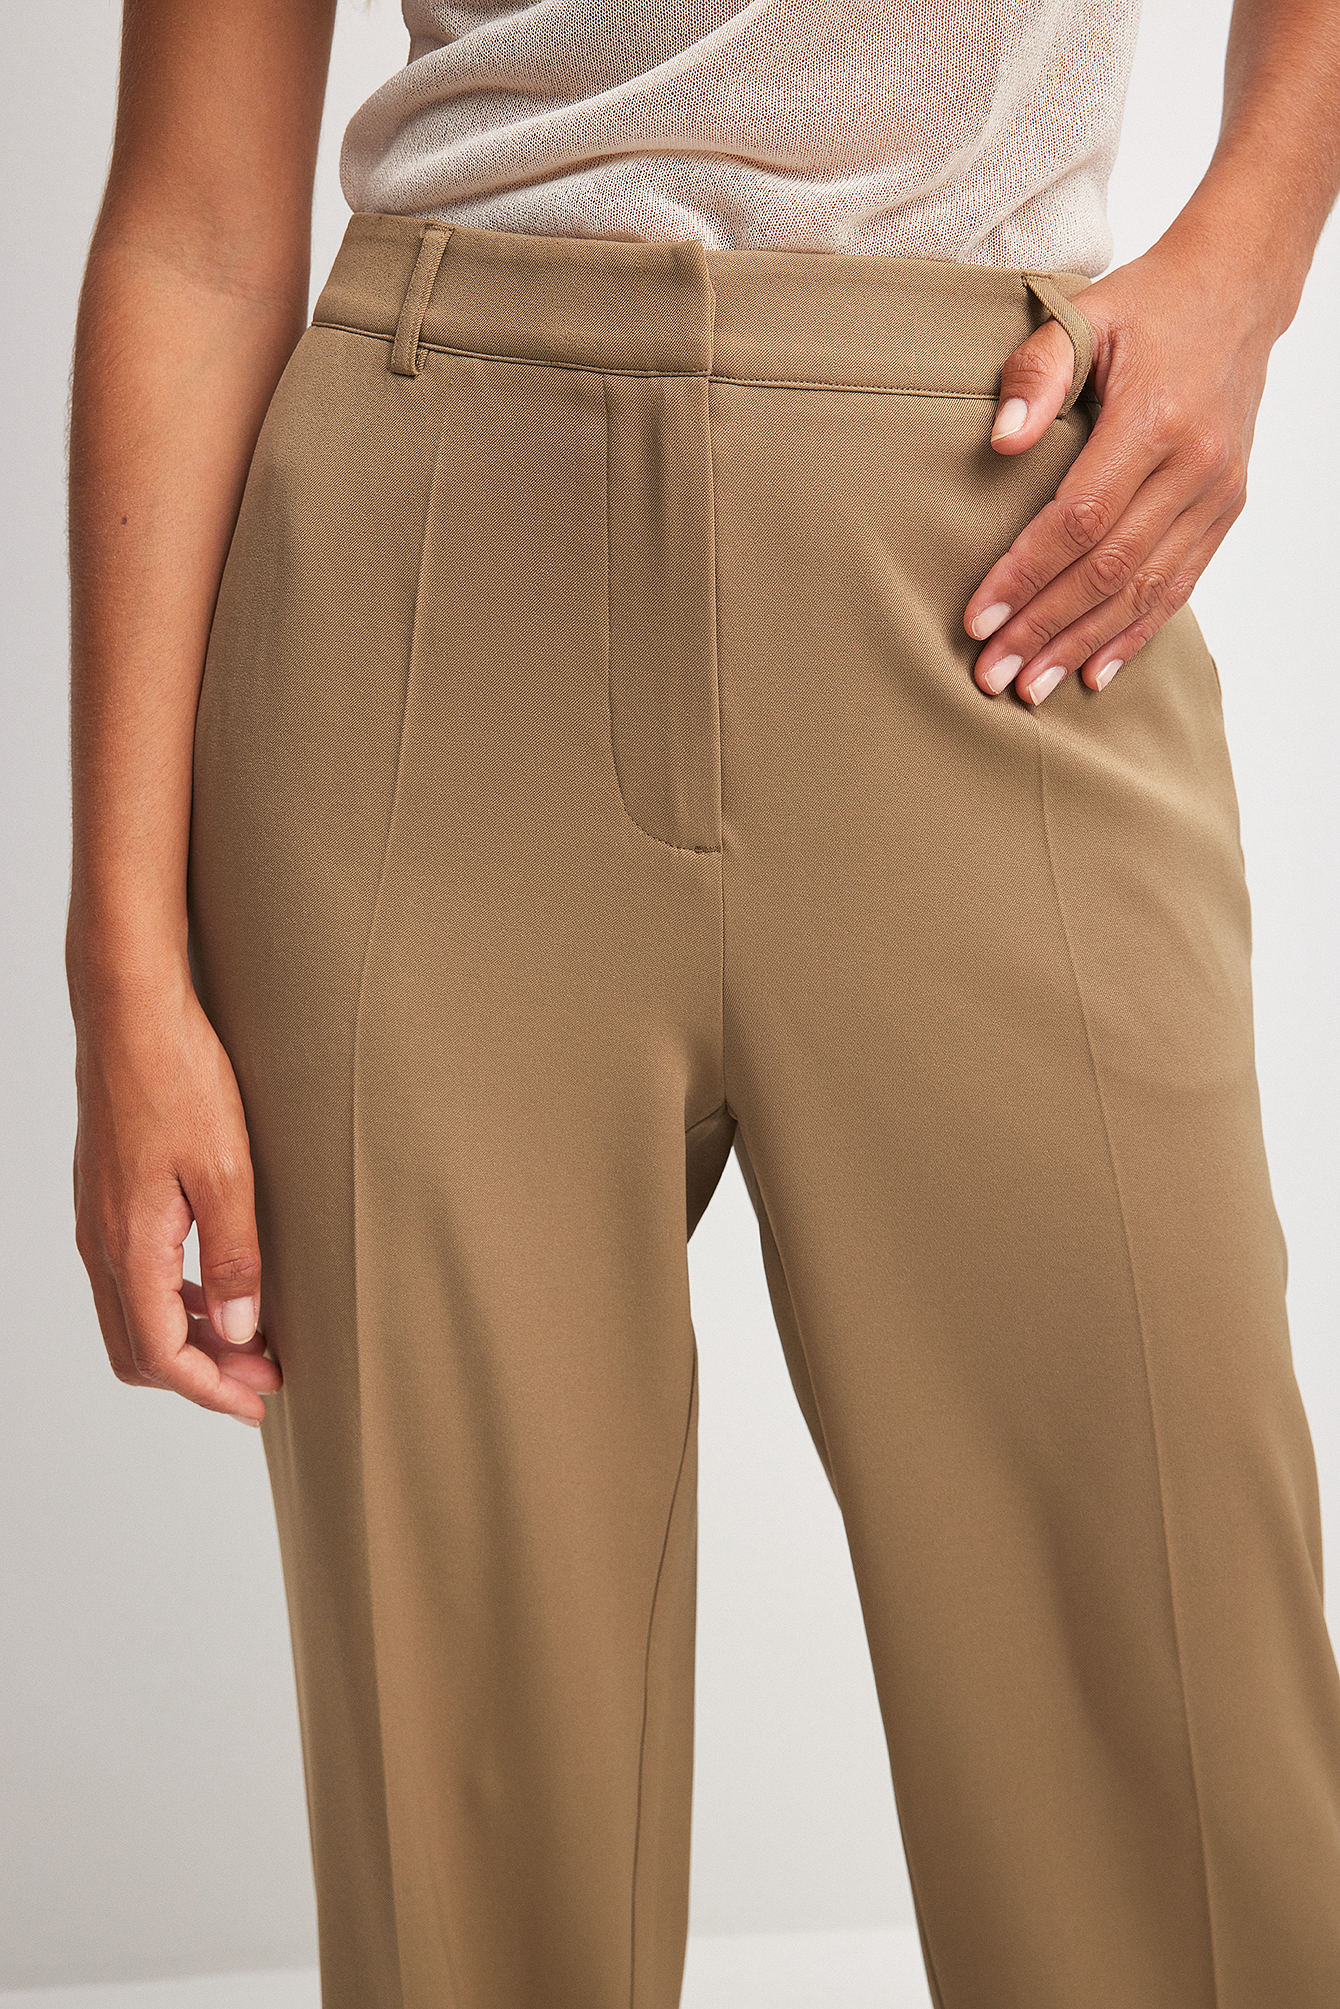 Shop best sellers at NA-KD.com, Chain Detailed Puffy Pants Beige, #nakd  #nakdfashion #pants #puffypan…